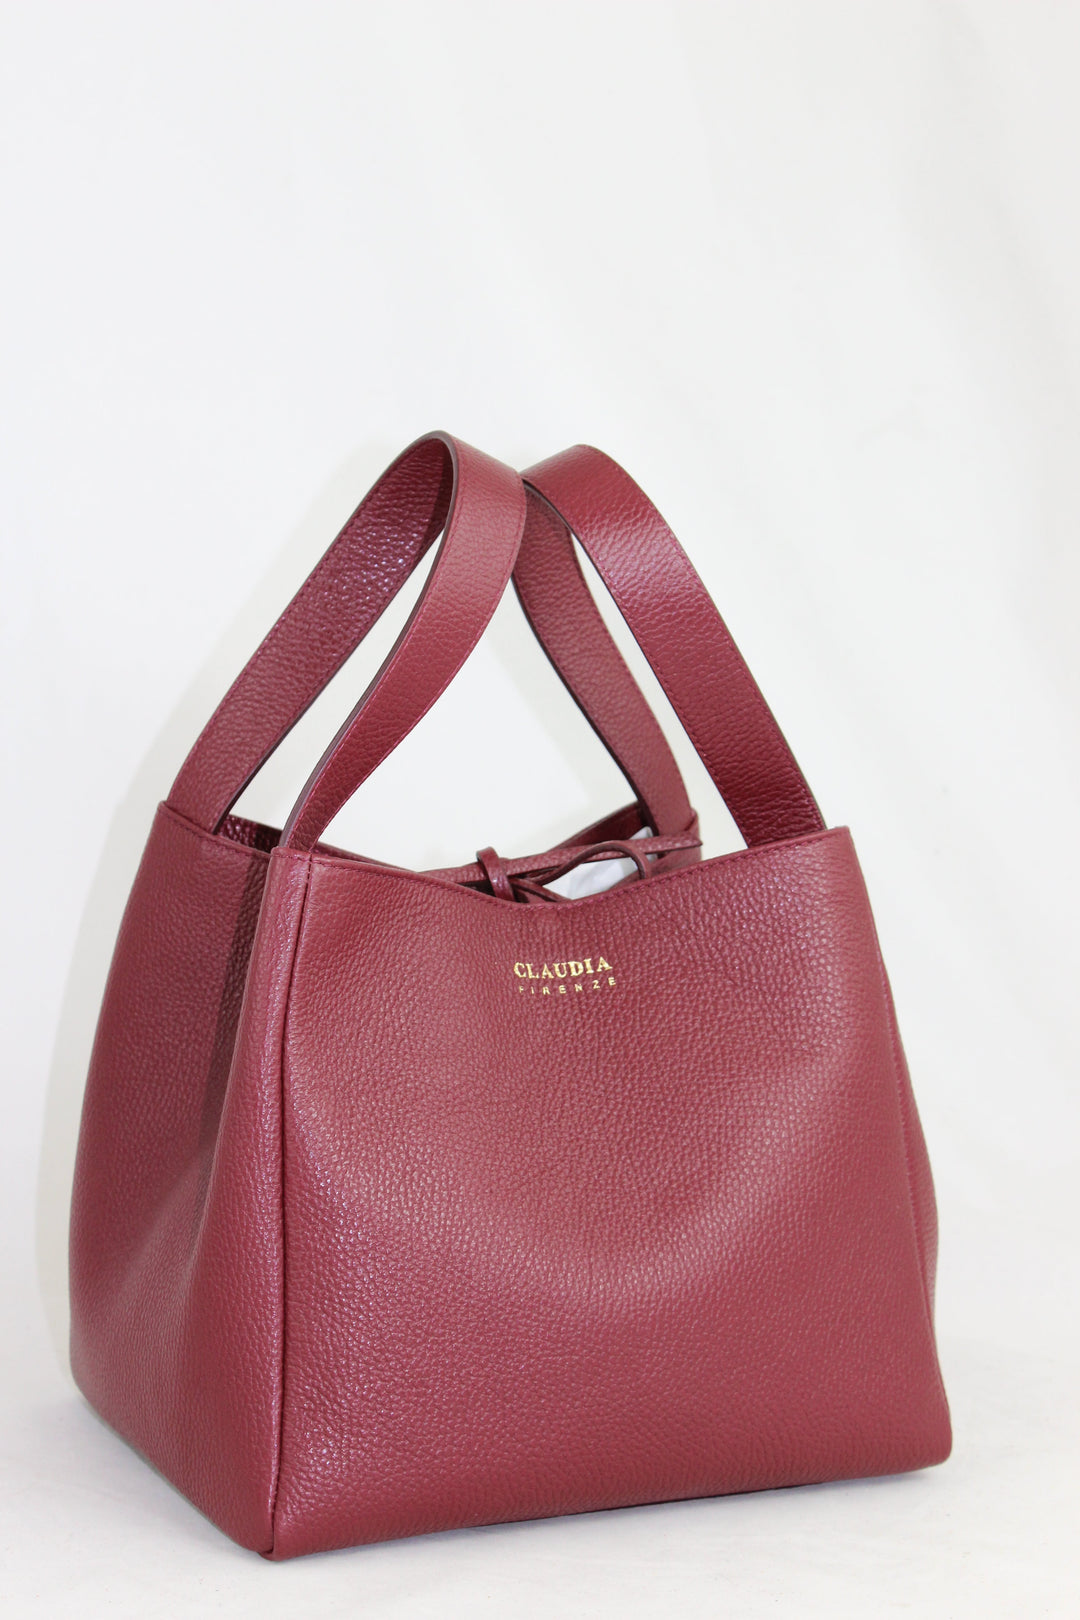 Maroon leather handbag with gold Claudia branding on white background